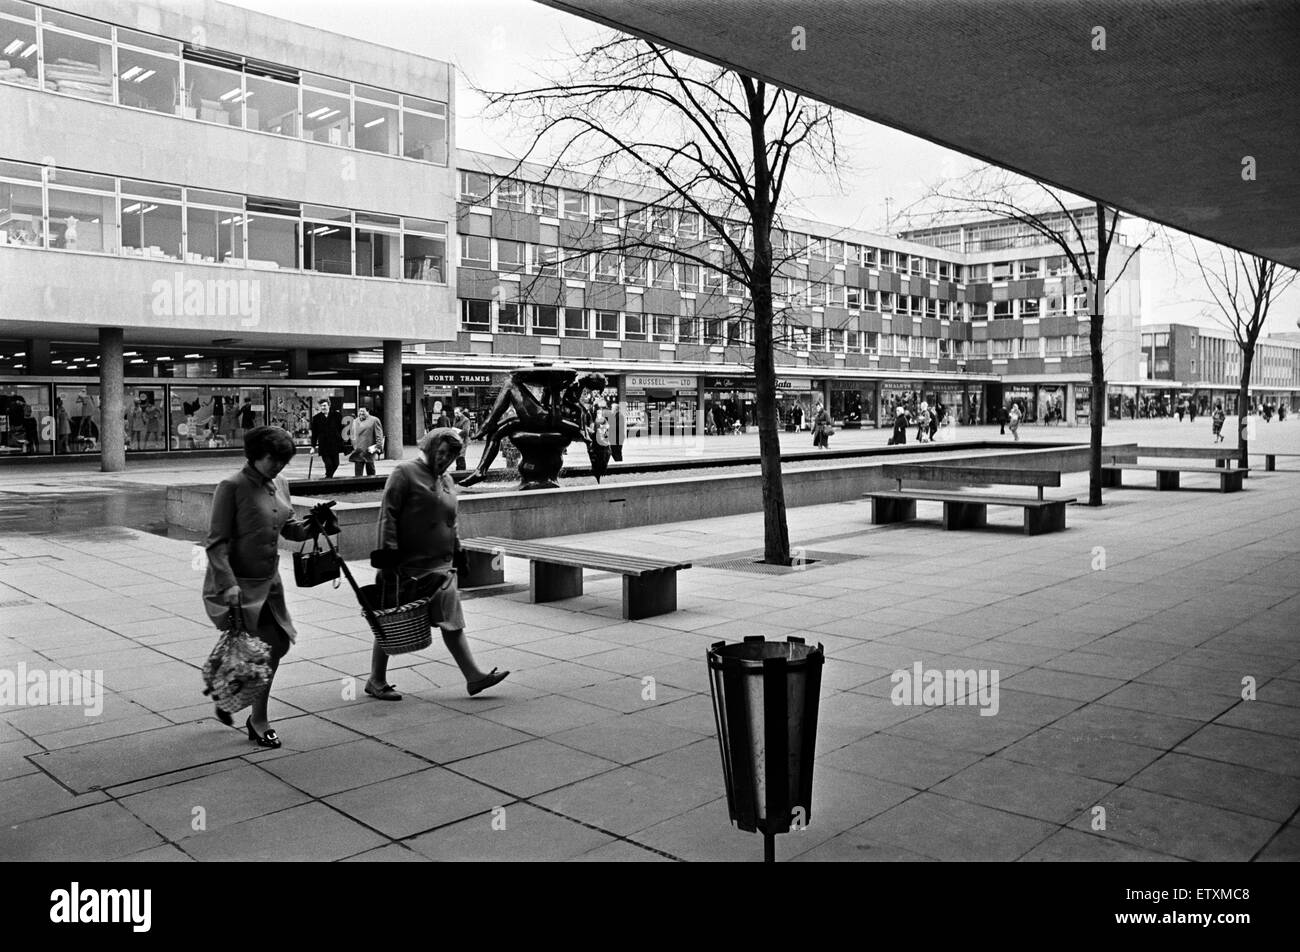 The Mother & Child Statue in Basildon Town Centre, Essex. 2nd April 1969. Stock Photo